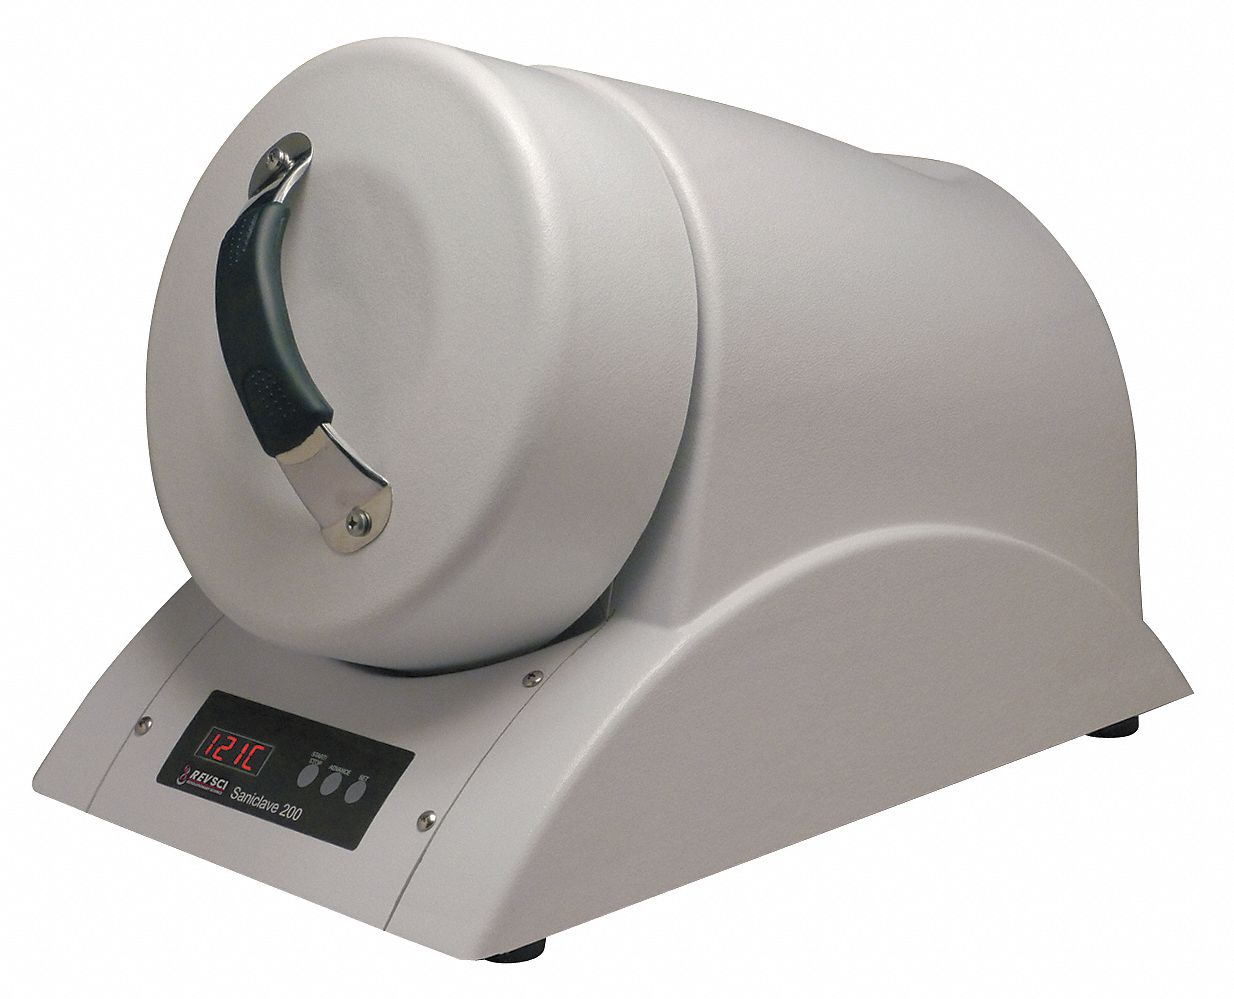 Saniclave-Autoclave: 121° to 124°C, 124°C Max. Temp. (C), Stainless Steel